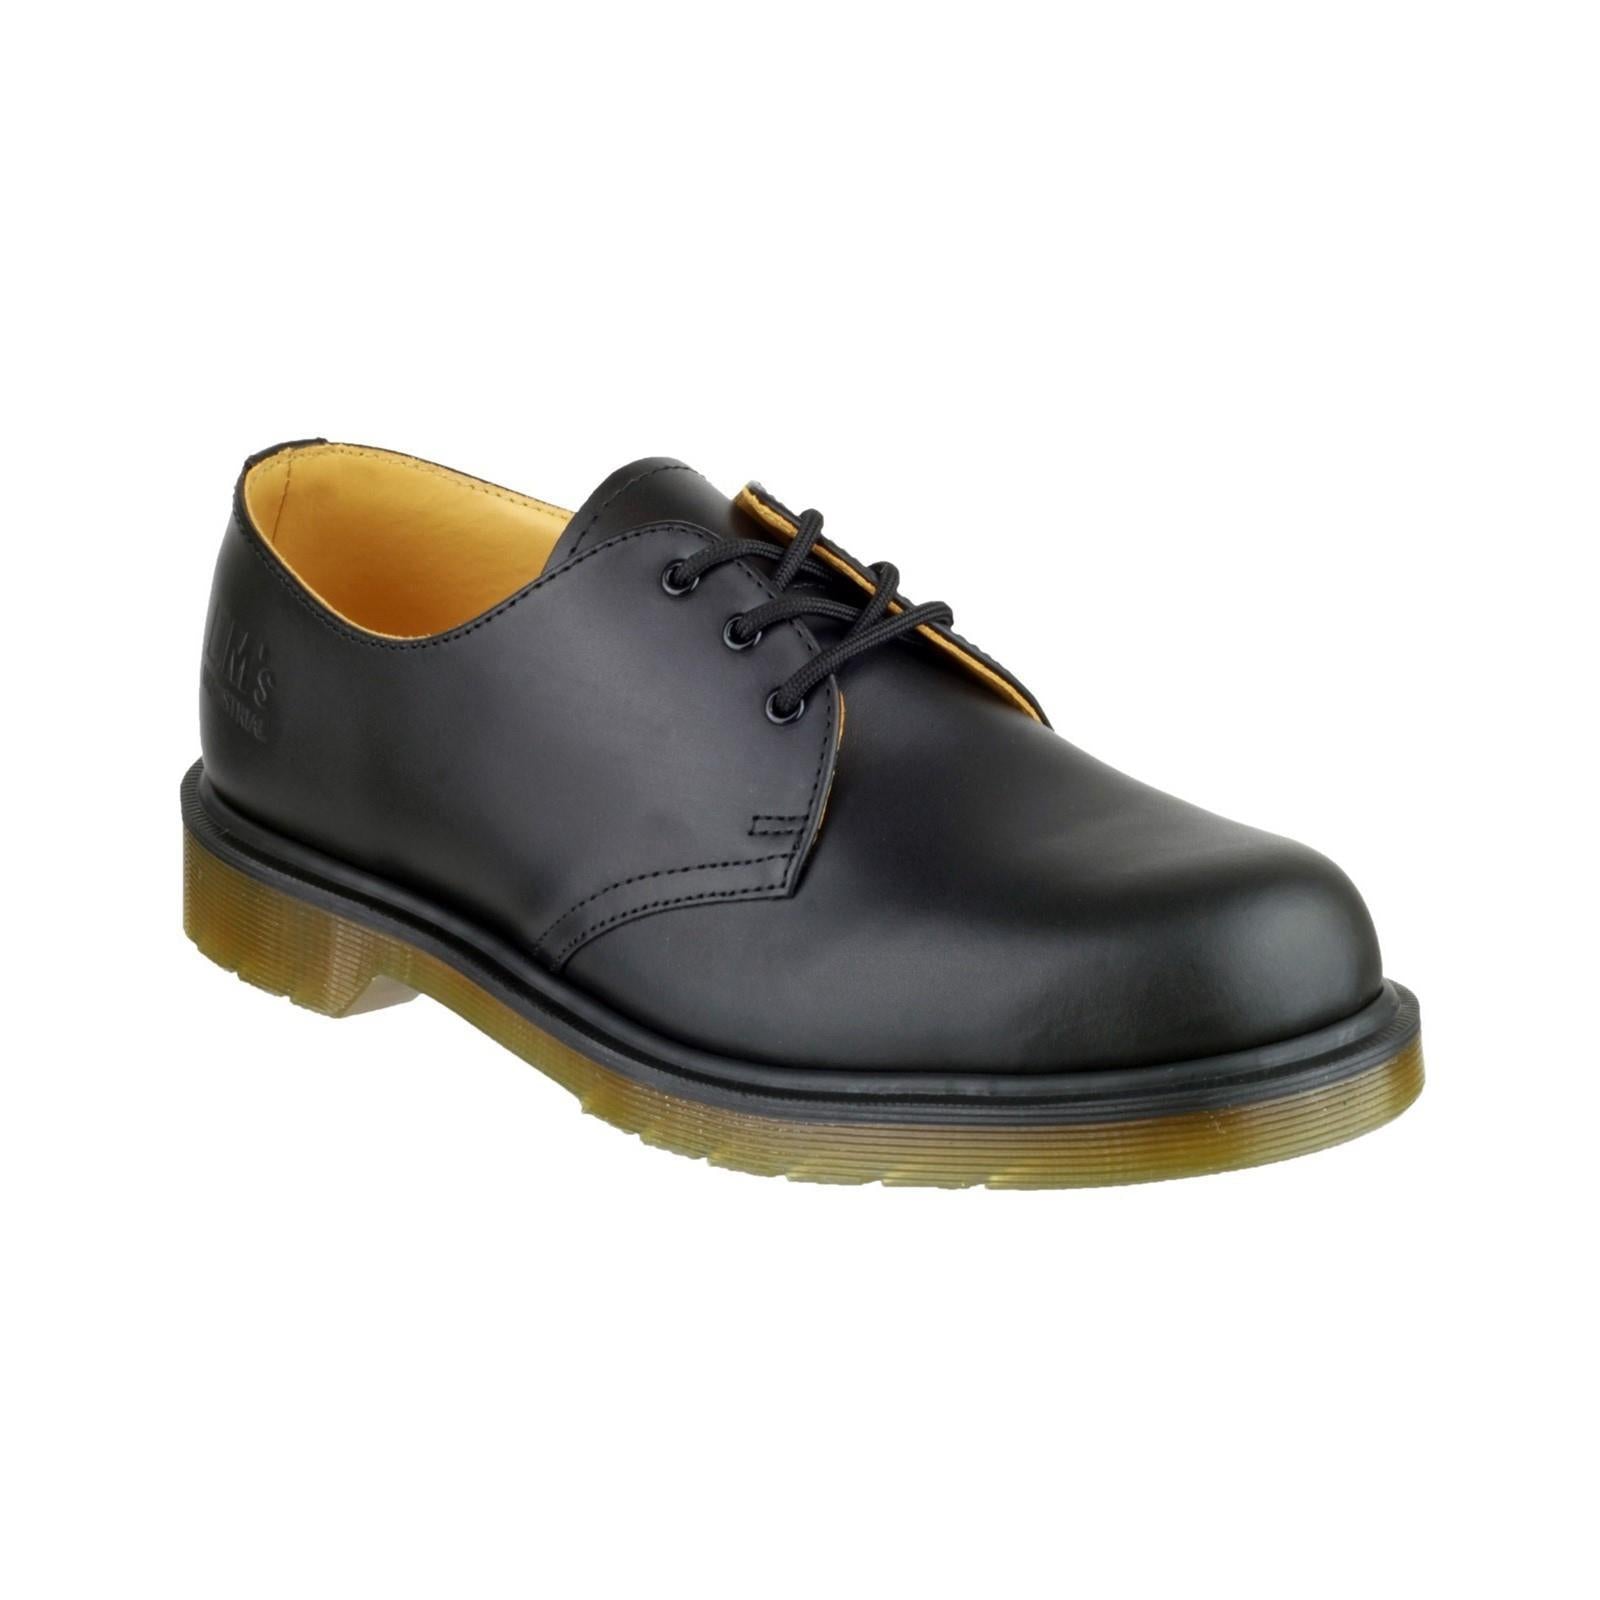 Dr Martens Airwair B8249 black leather lace-up shoe